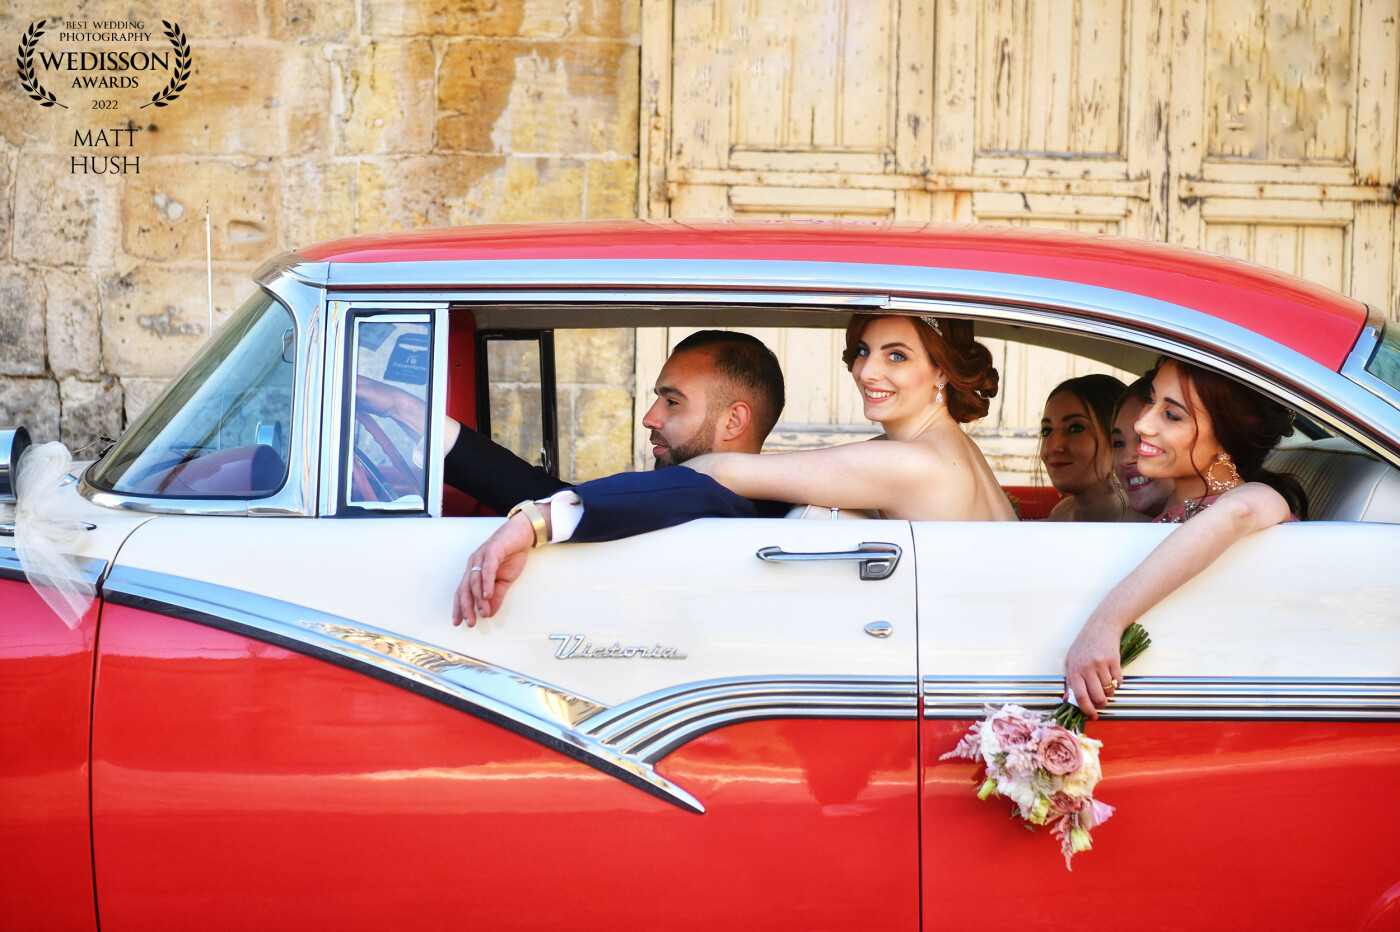 10th June 2022 was Leeann & Luke’s wedding day on the little island of Gozo in the heart of the Mediterranean. I love the lines of the arms of the bride, groom and bridesmaid complimenting the design lines of their friends car. The pastel flowers matching the rustic wooden door was a bonus!